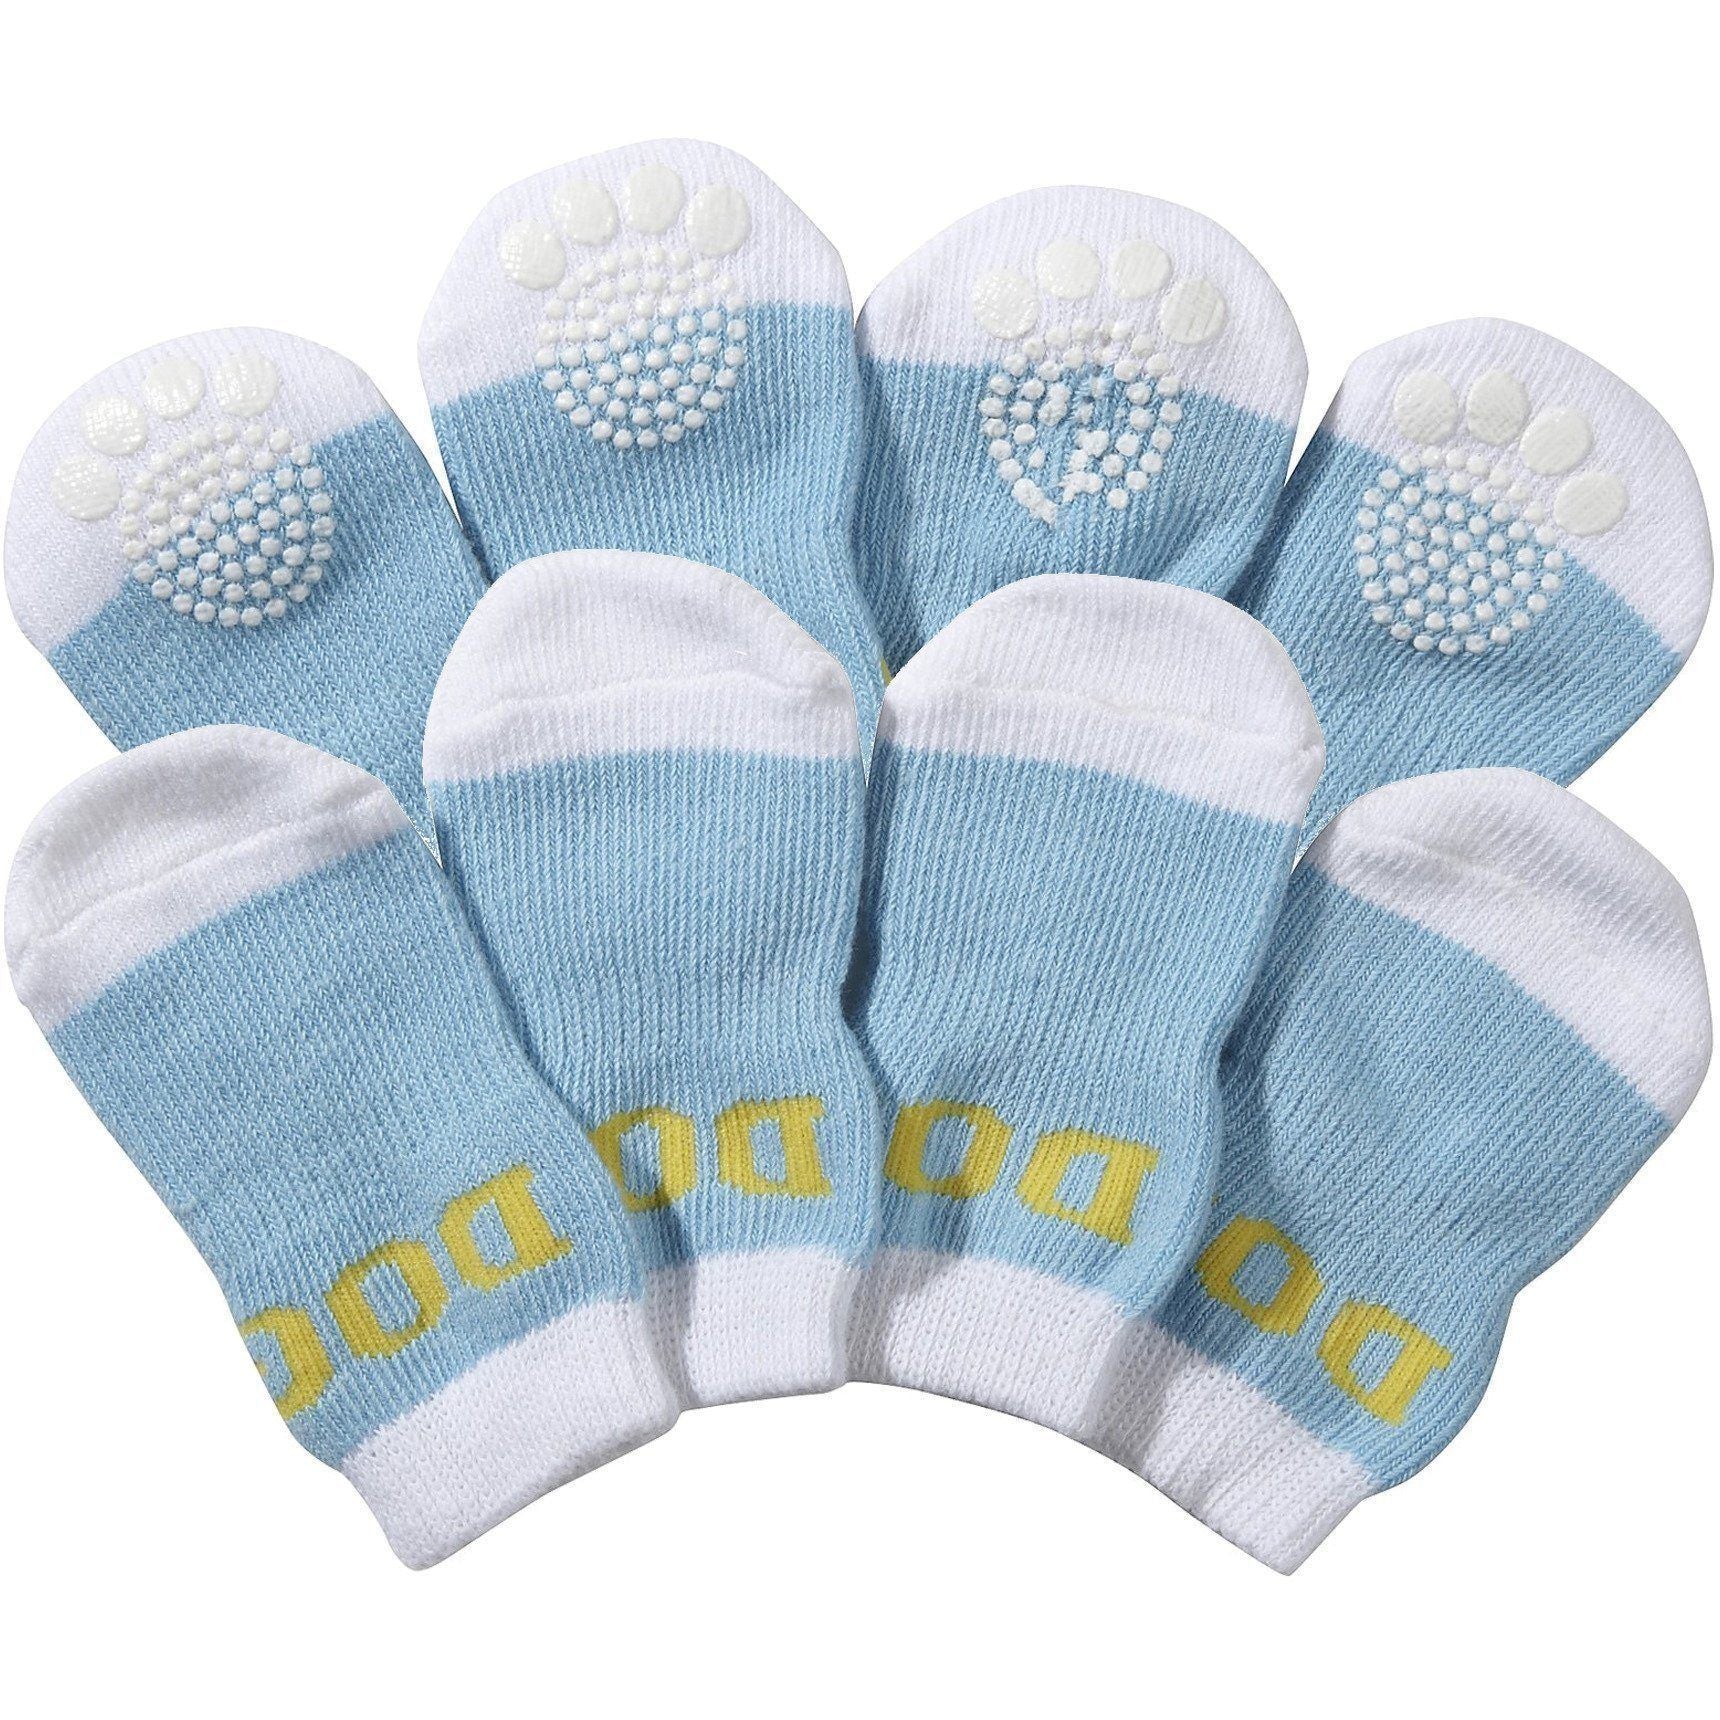 Pet Life ® Anti-Slip Rubberized Gripped Breathable Stretch Pet Dog Socks - Set of 4 Small Blue & White